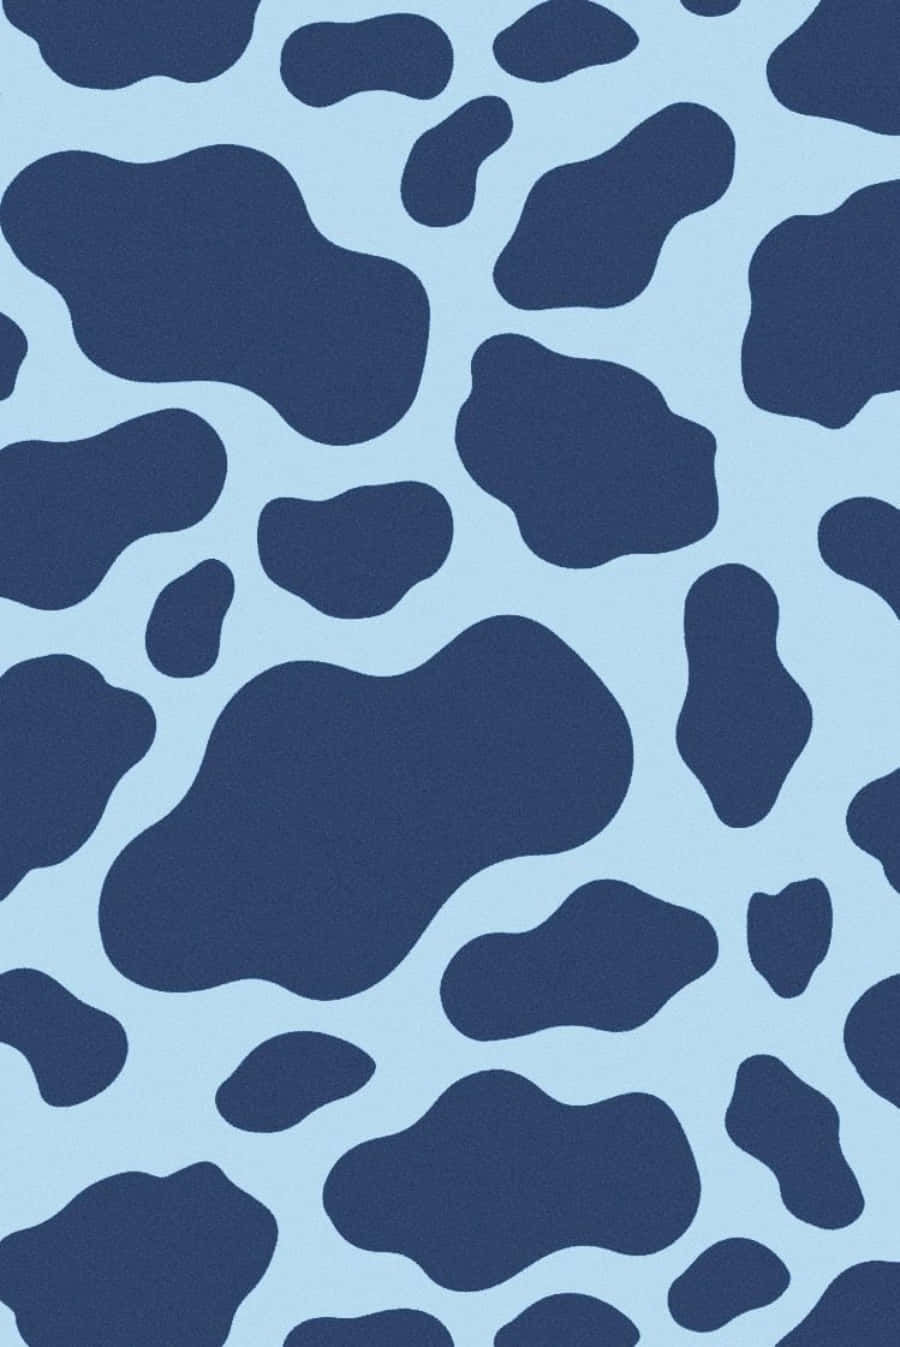 Get spotted in style with Blue Cow Print Wallpaper